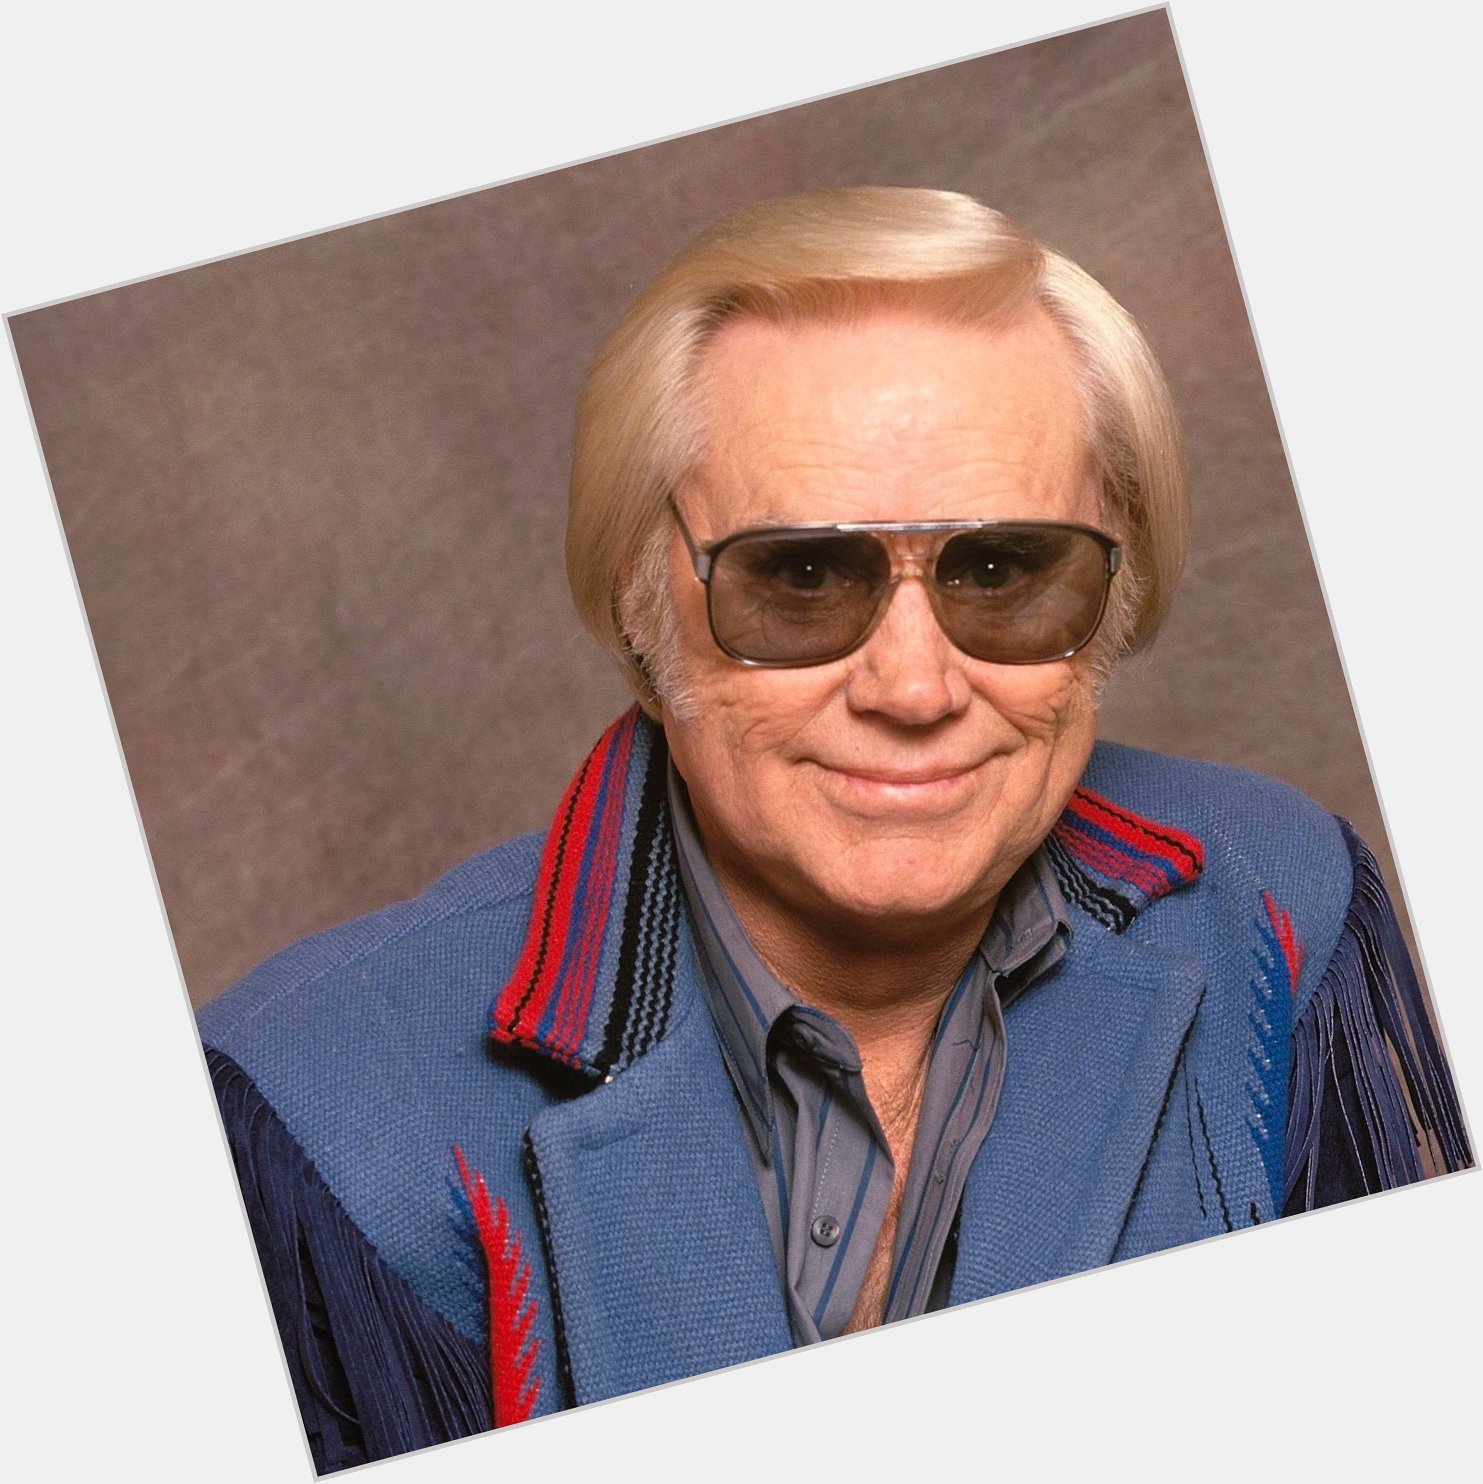 Happy 86 birthday to George Jones up in heaven. He was a great singer. May he Rest In Peace.    